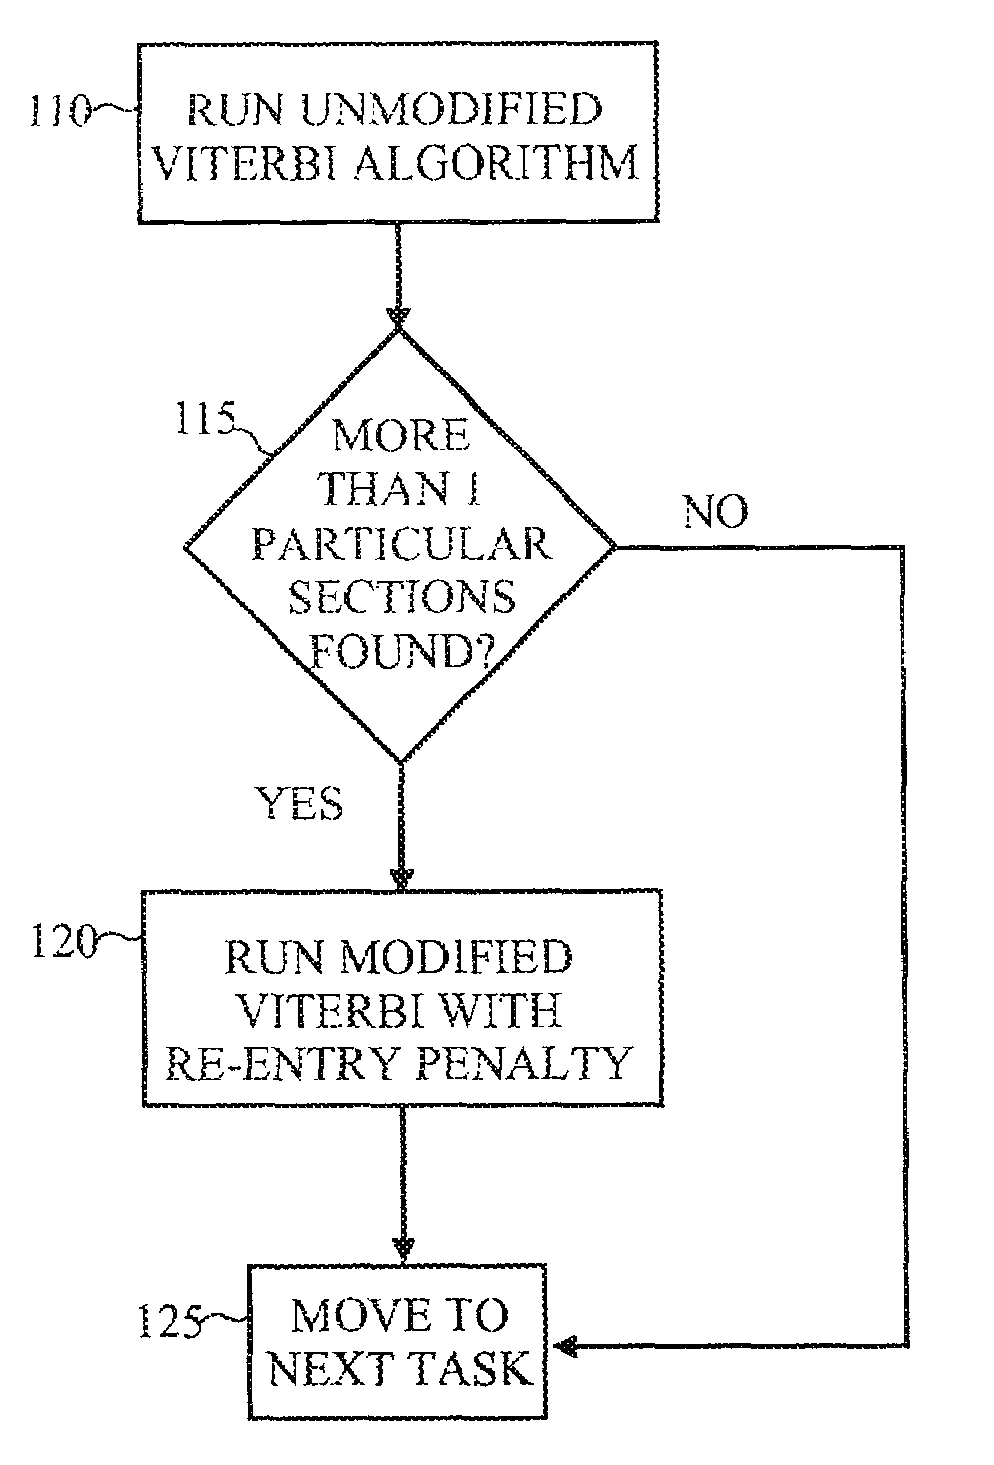 Method for improving results in an HMM-based segmentation system by incorporating external knowledge